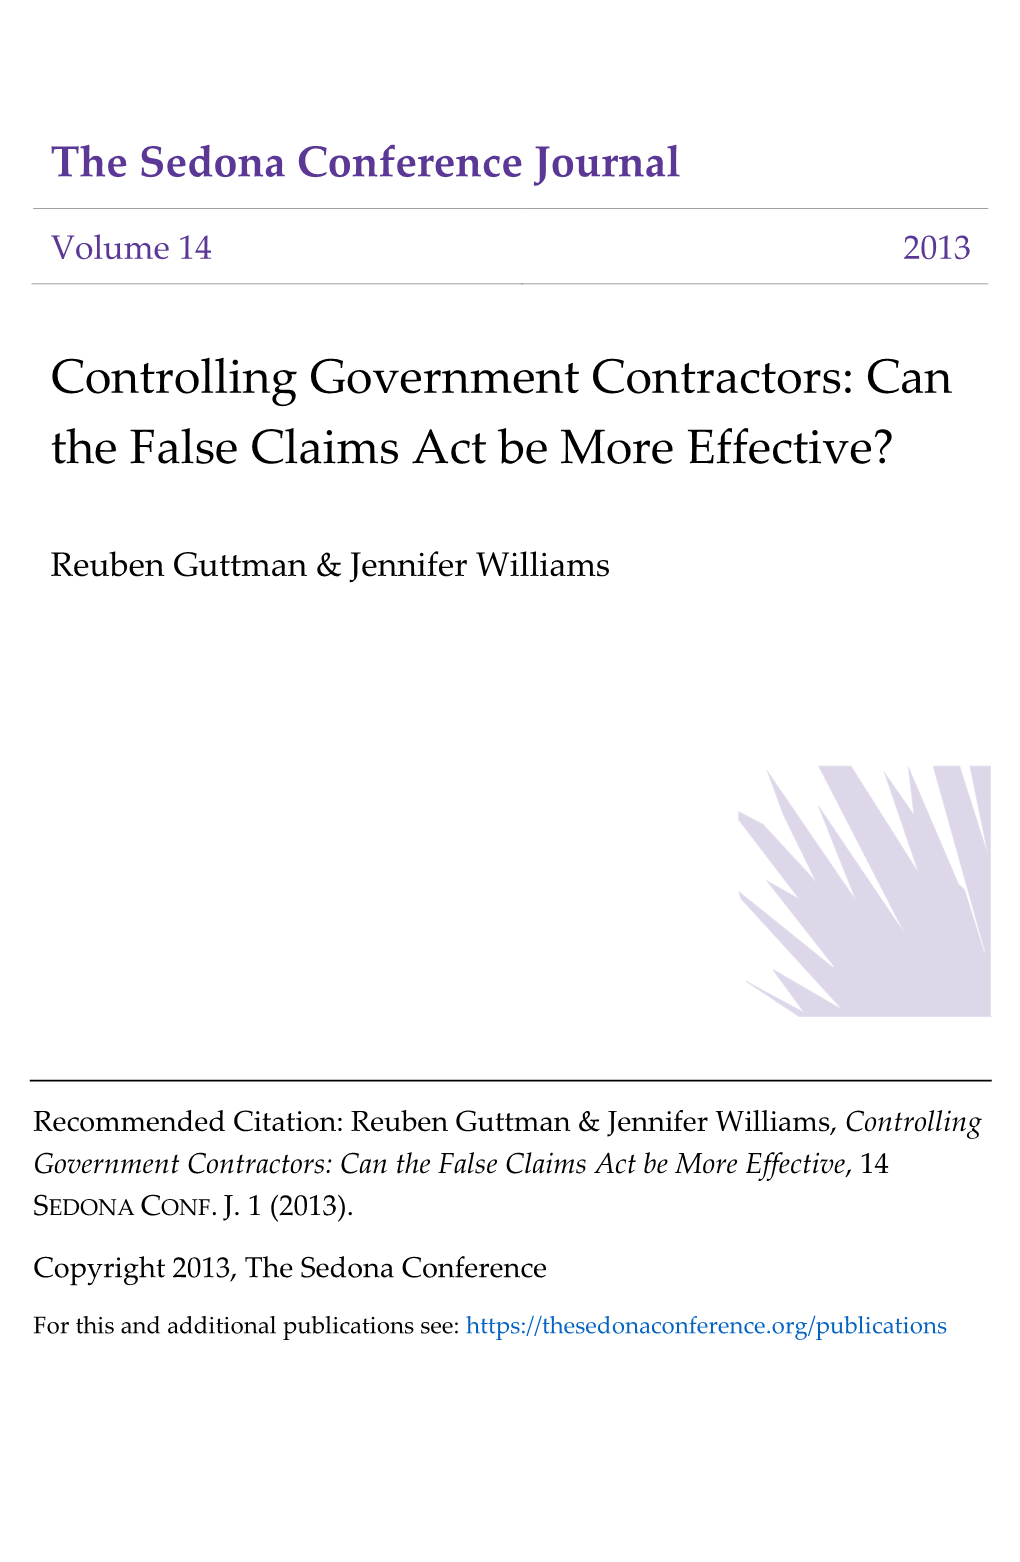 Can the False Claims Act Be More Effective?